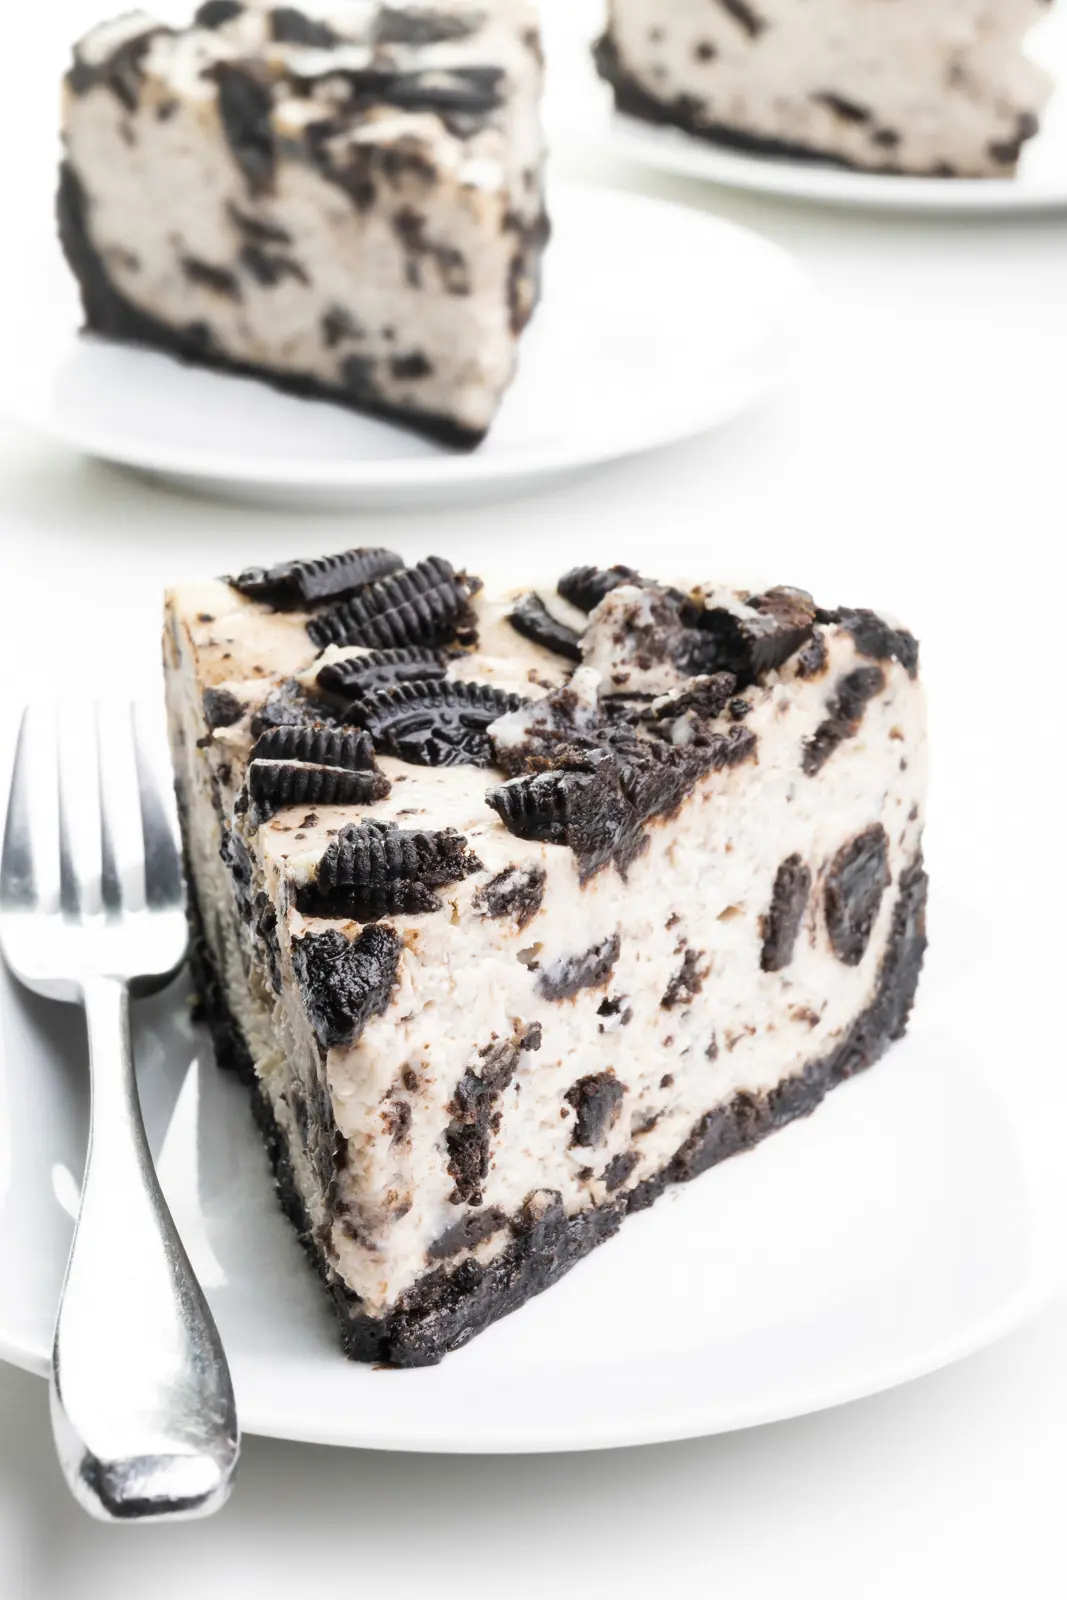 A slice of Oreo cheesecake sits on a plate with a fork beside it. There are two more slices on plates behind it.